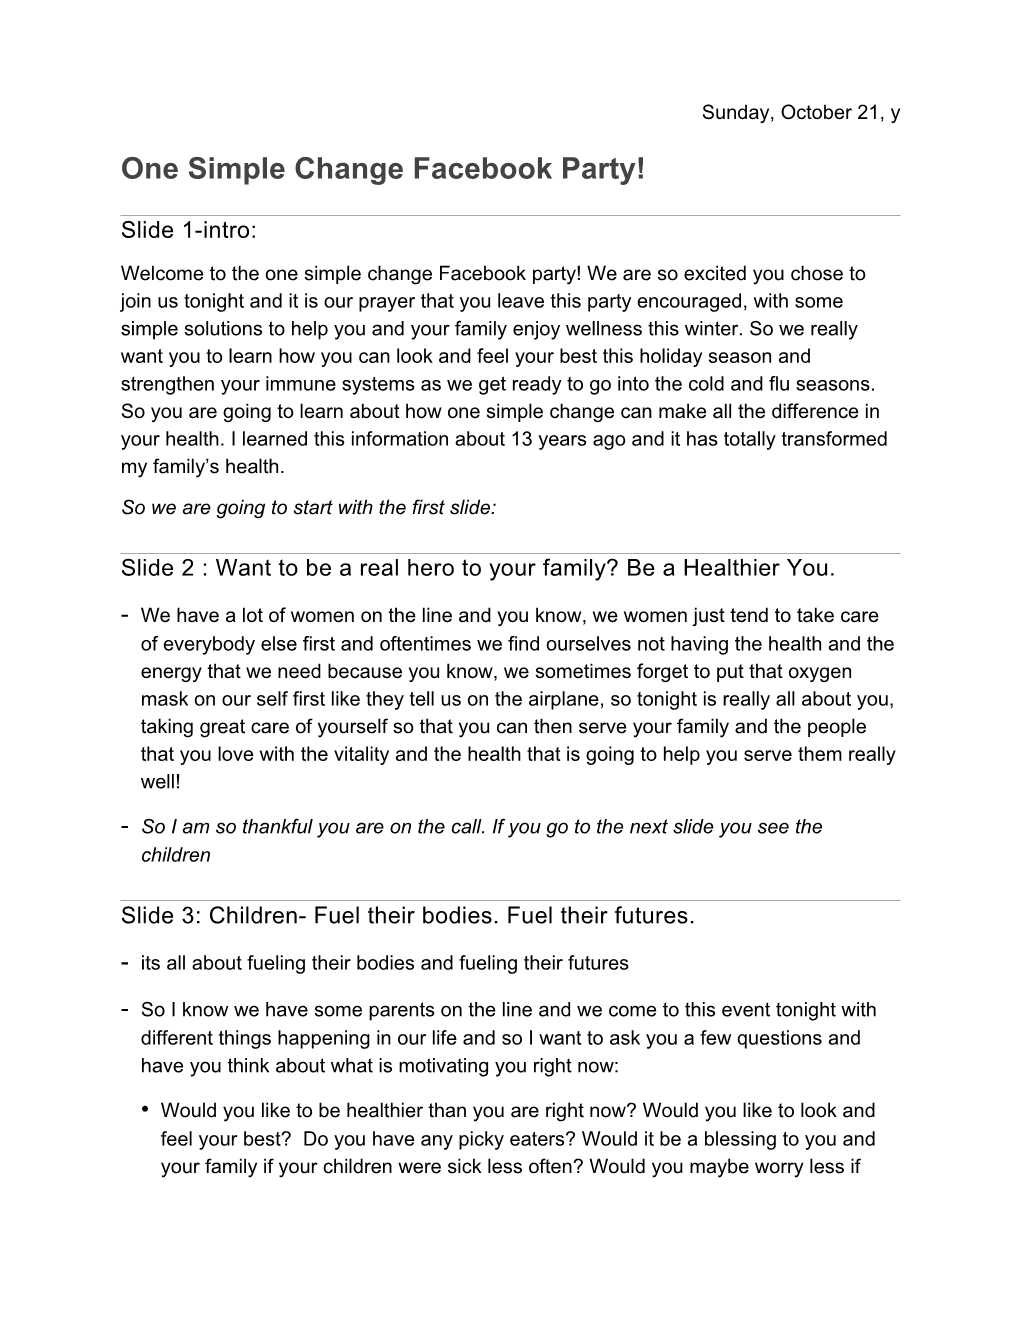 One Simple Change Facebook Party!